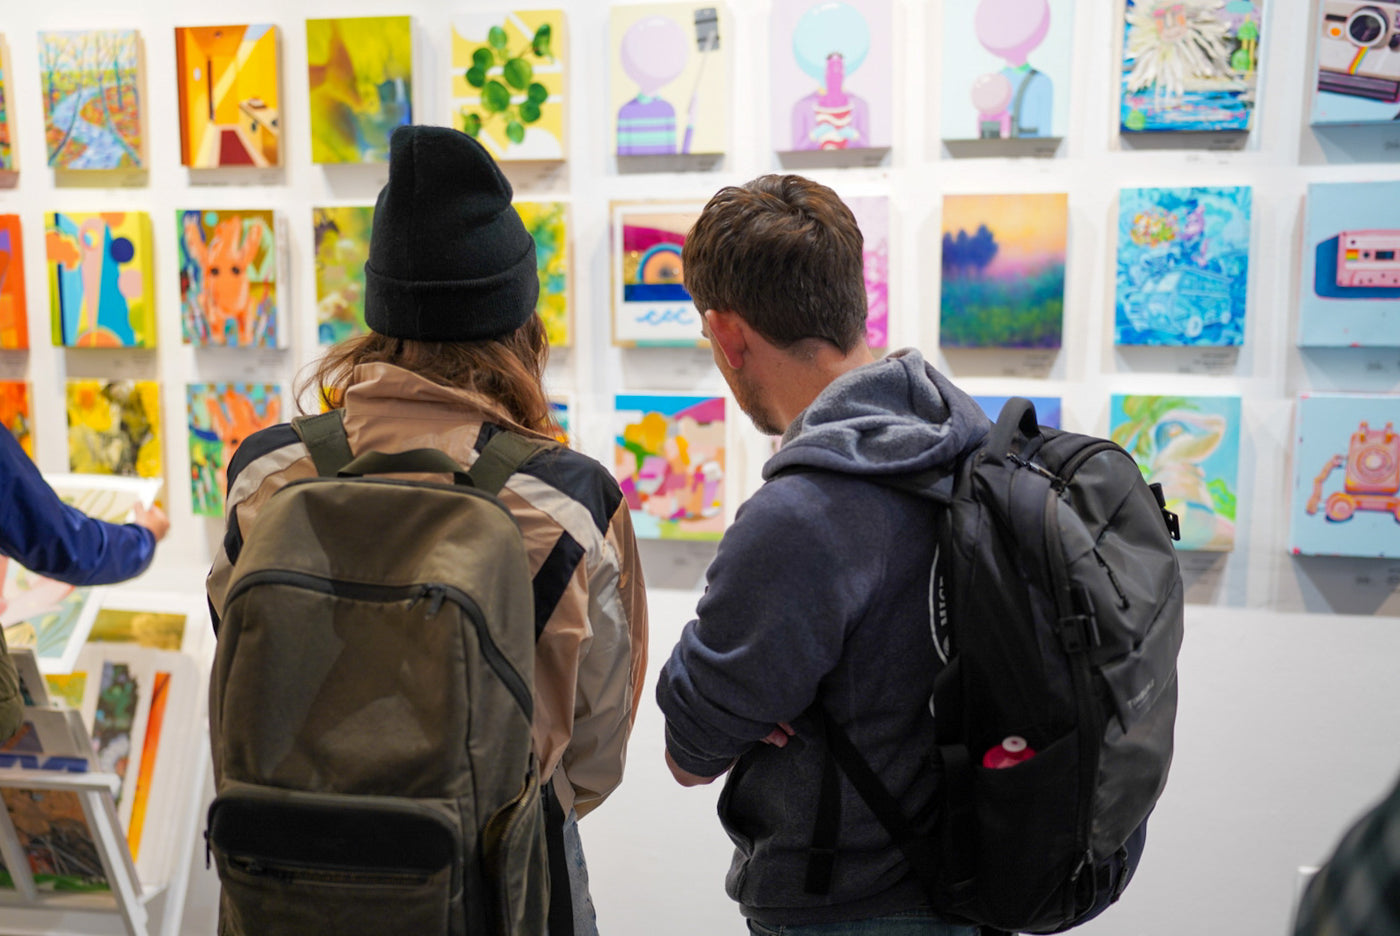 Photograph of two men viewing artwork.